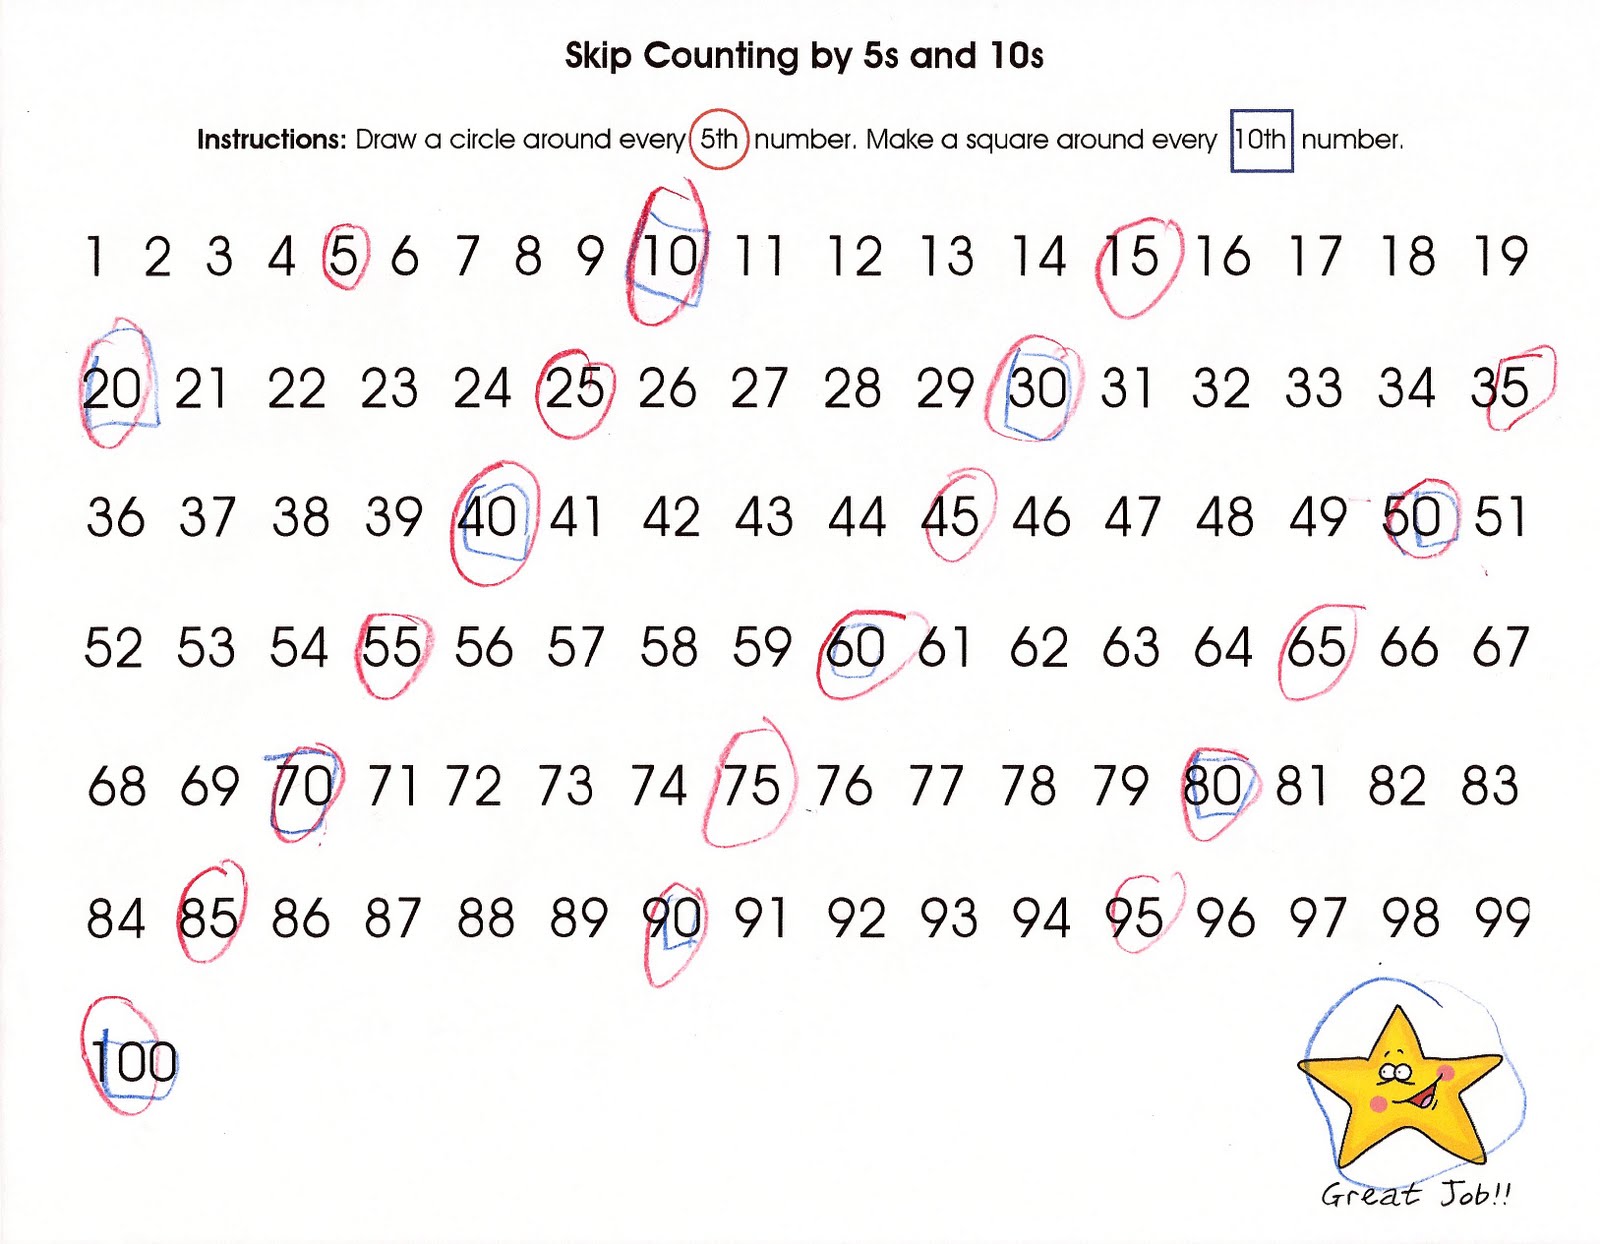 Relentlessly Fun, Deceptively Educational: Skip Counting by 5s and 10s